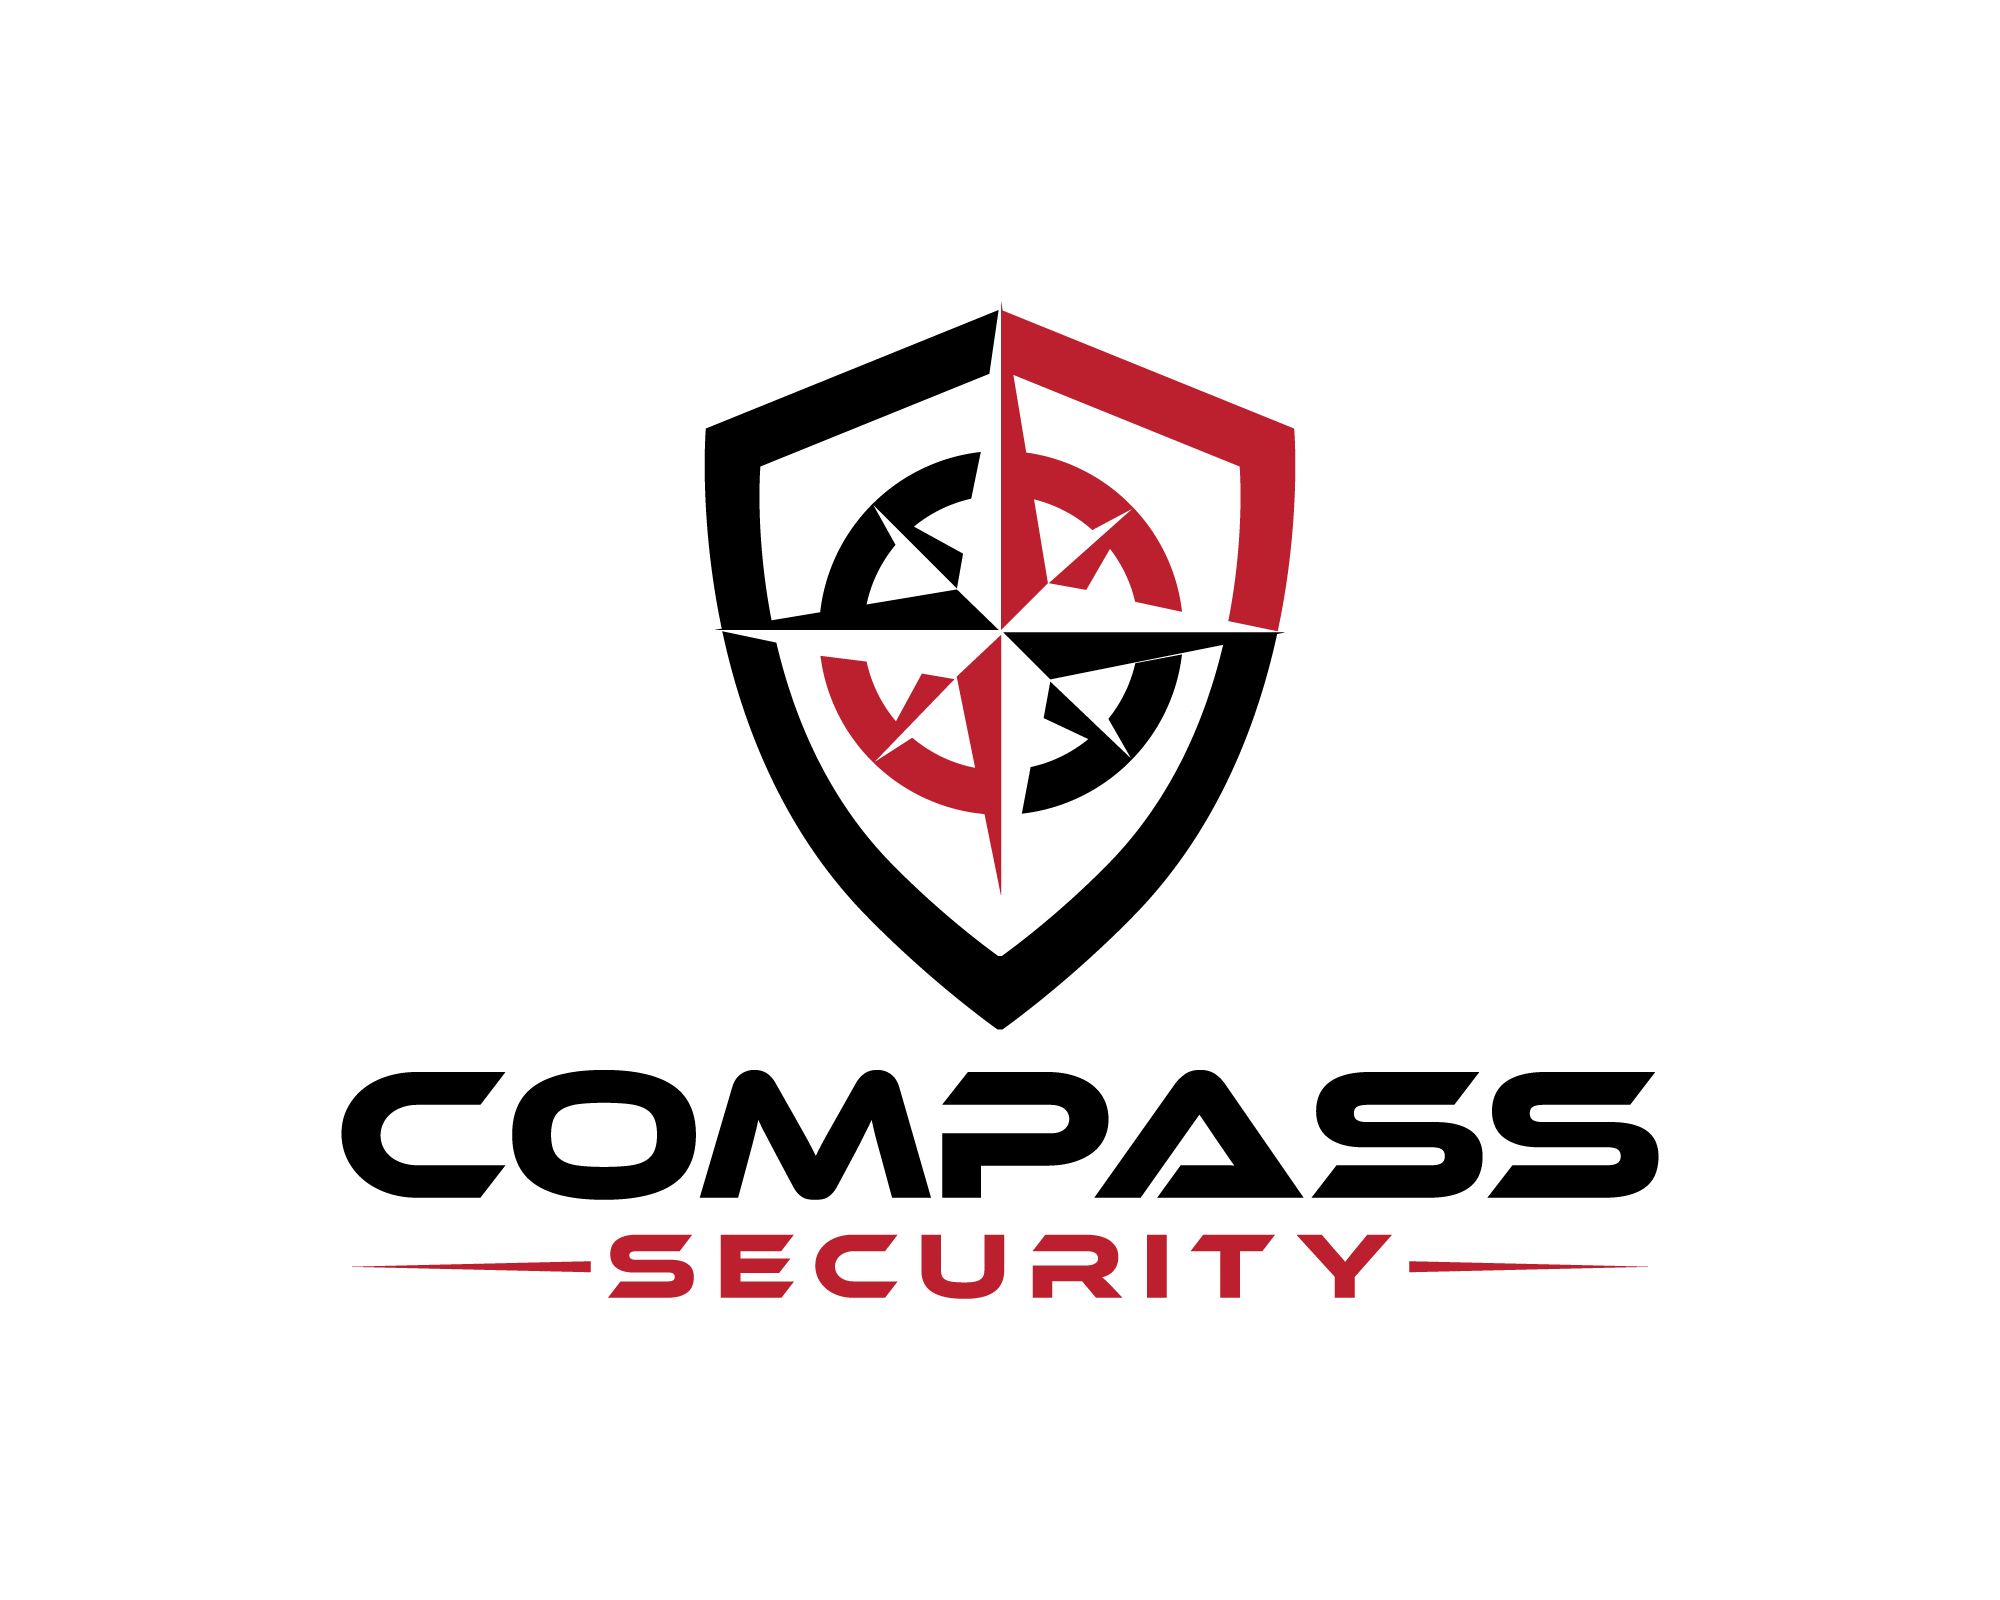 Logo Design Contest For Compass Security Hatchwise